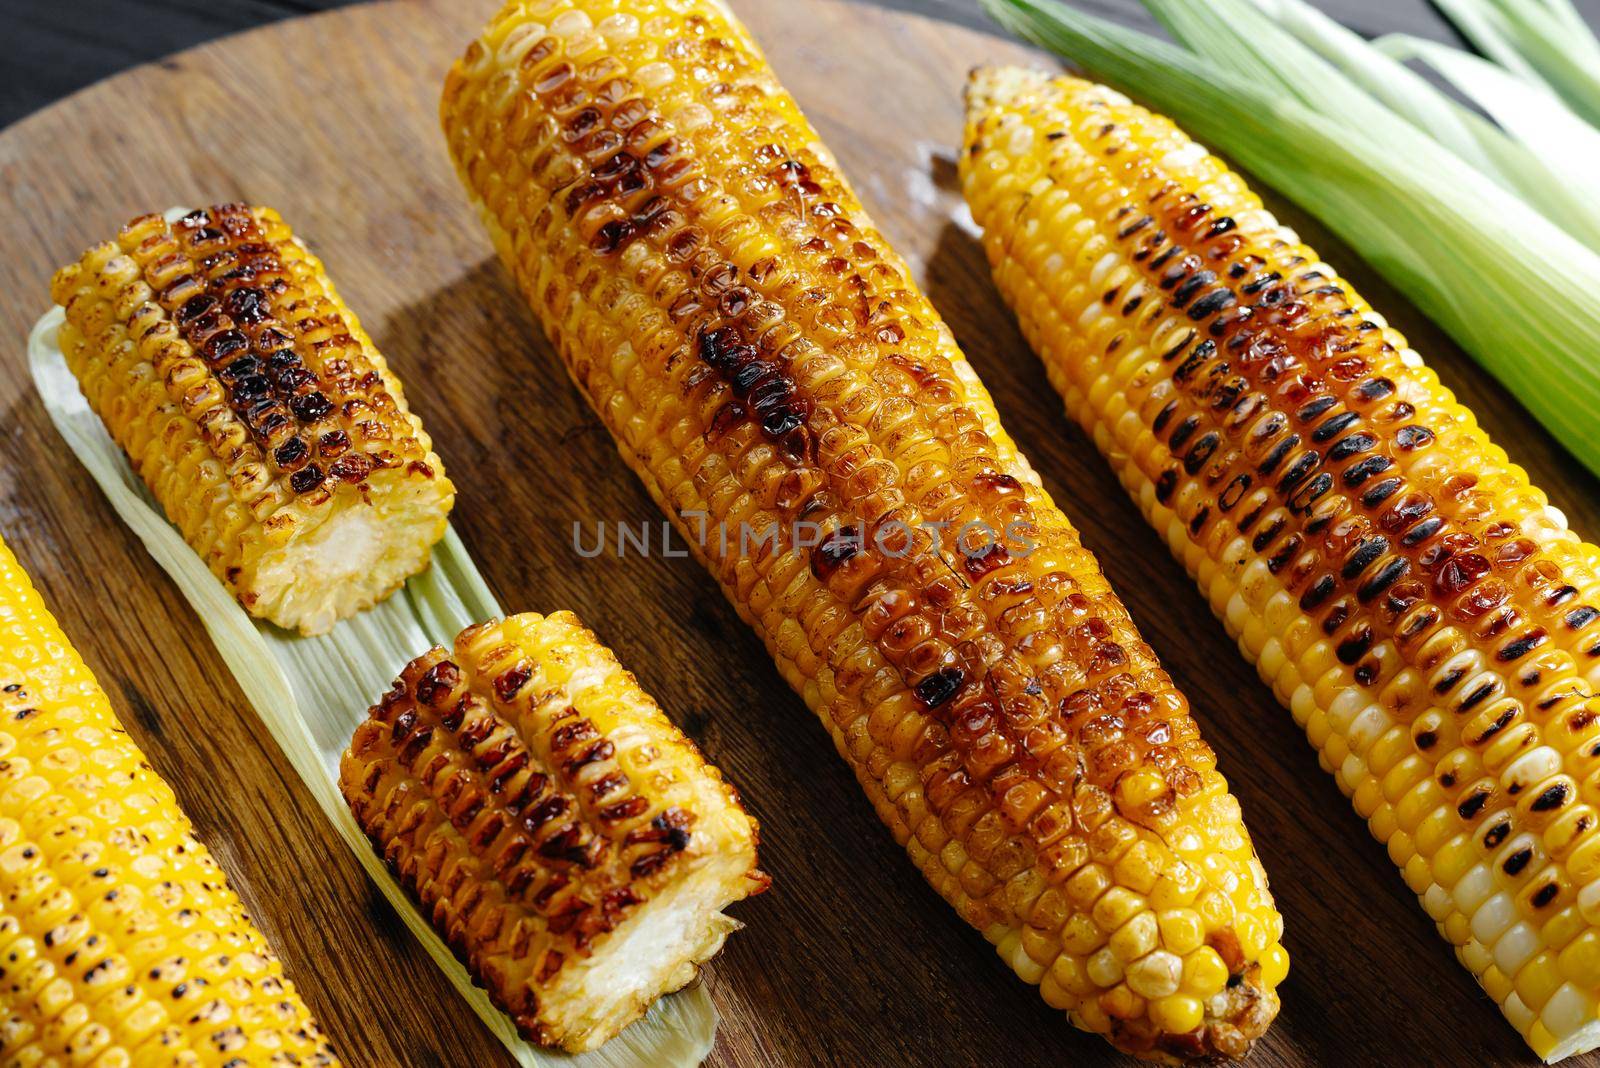 A cob of corn roasted over charcoal on a wooden board. Whole corn cobs by gulyaevstudio